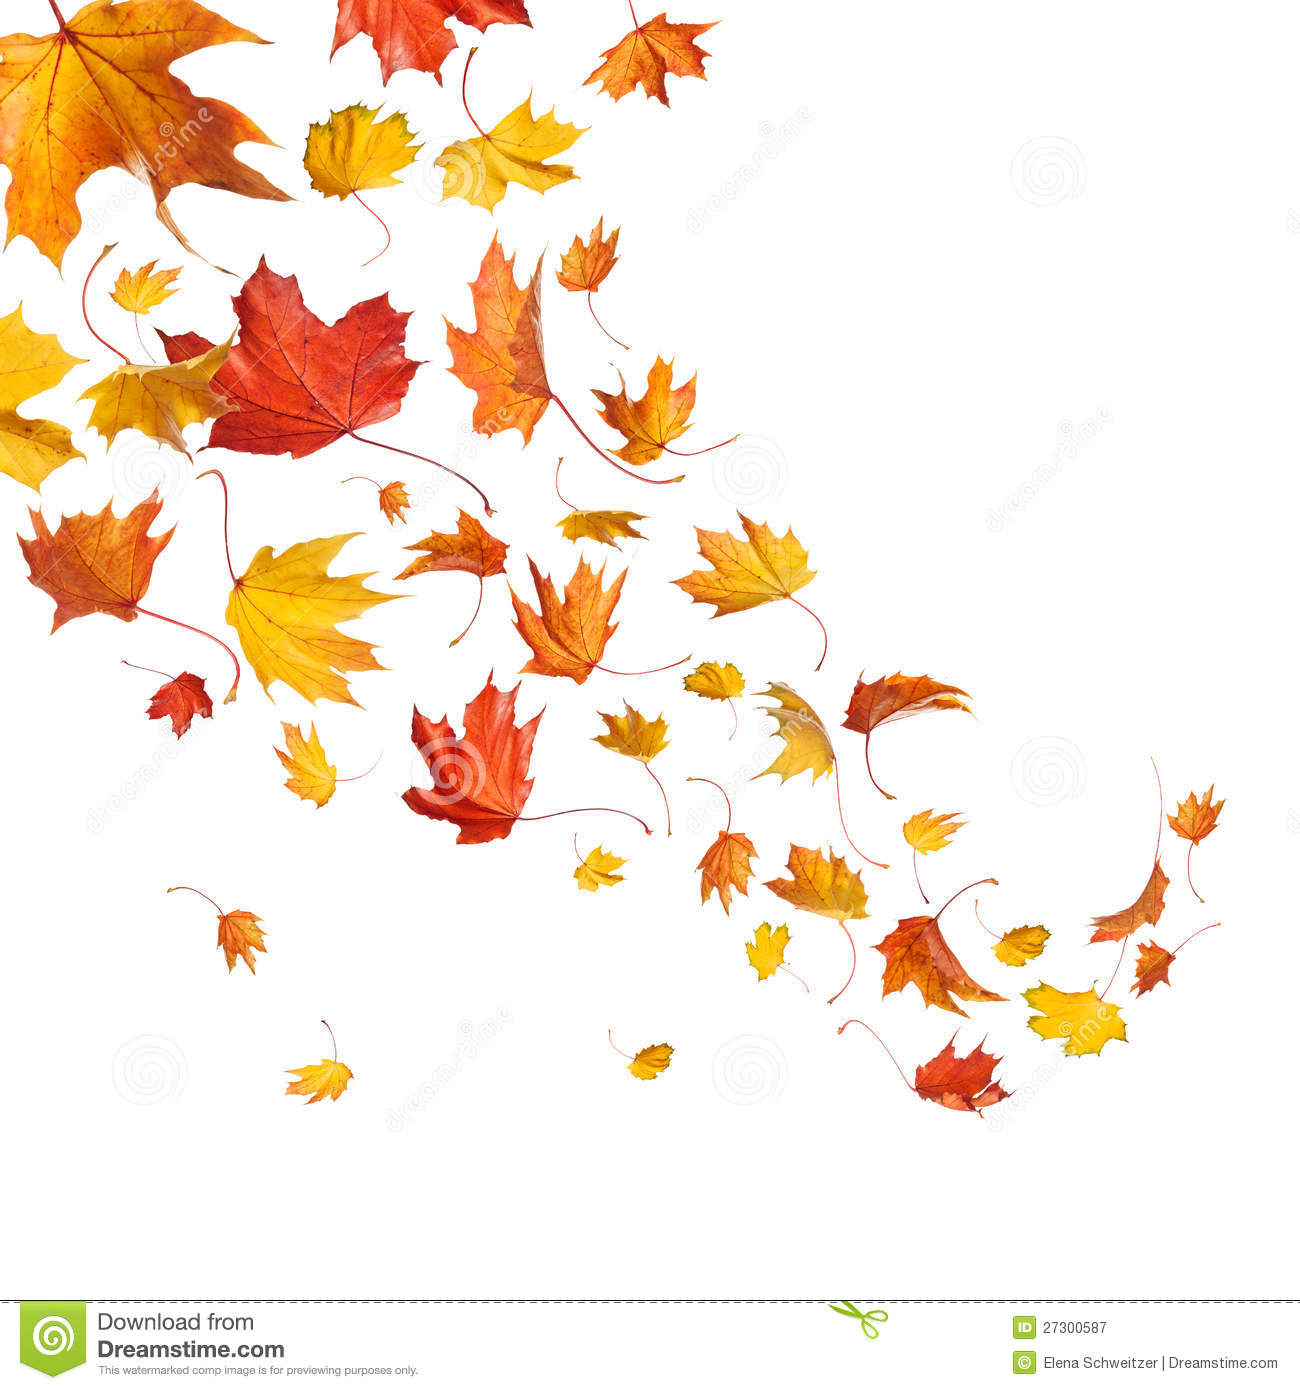 Autumn Falling Leaves Royalty Free Stock Photography   Image  27300587